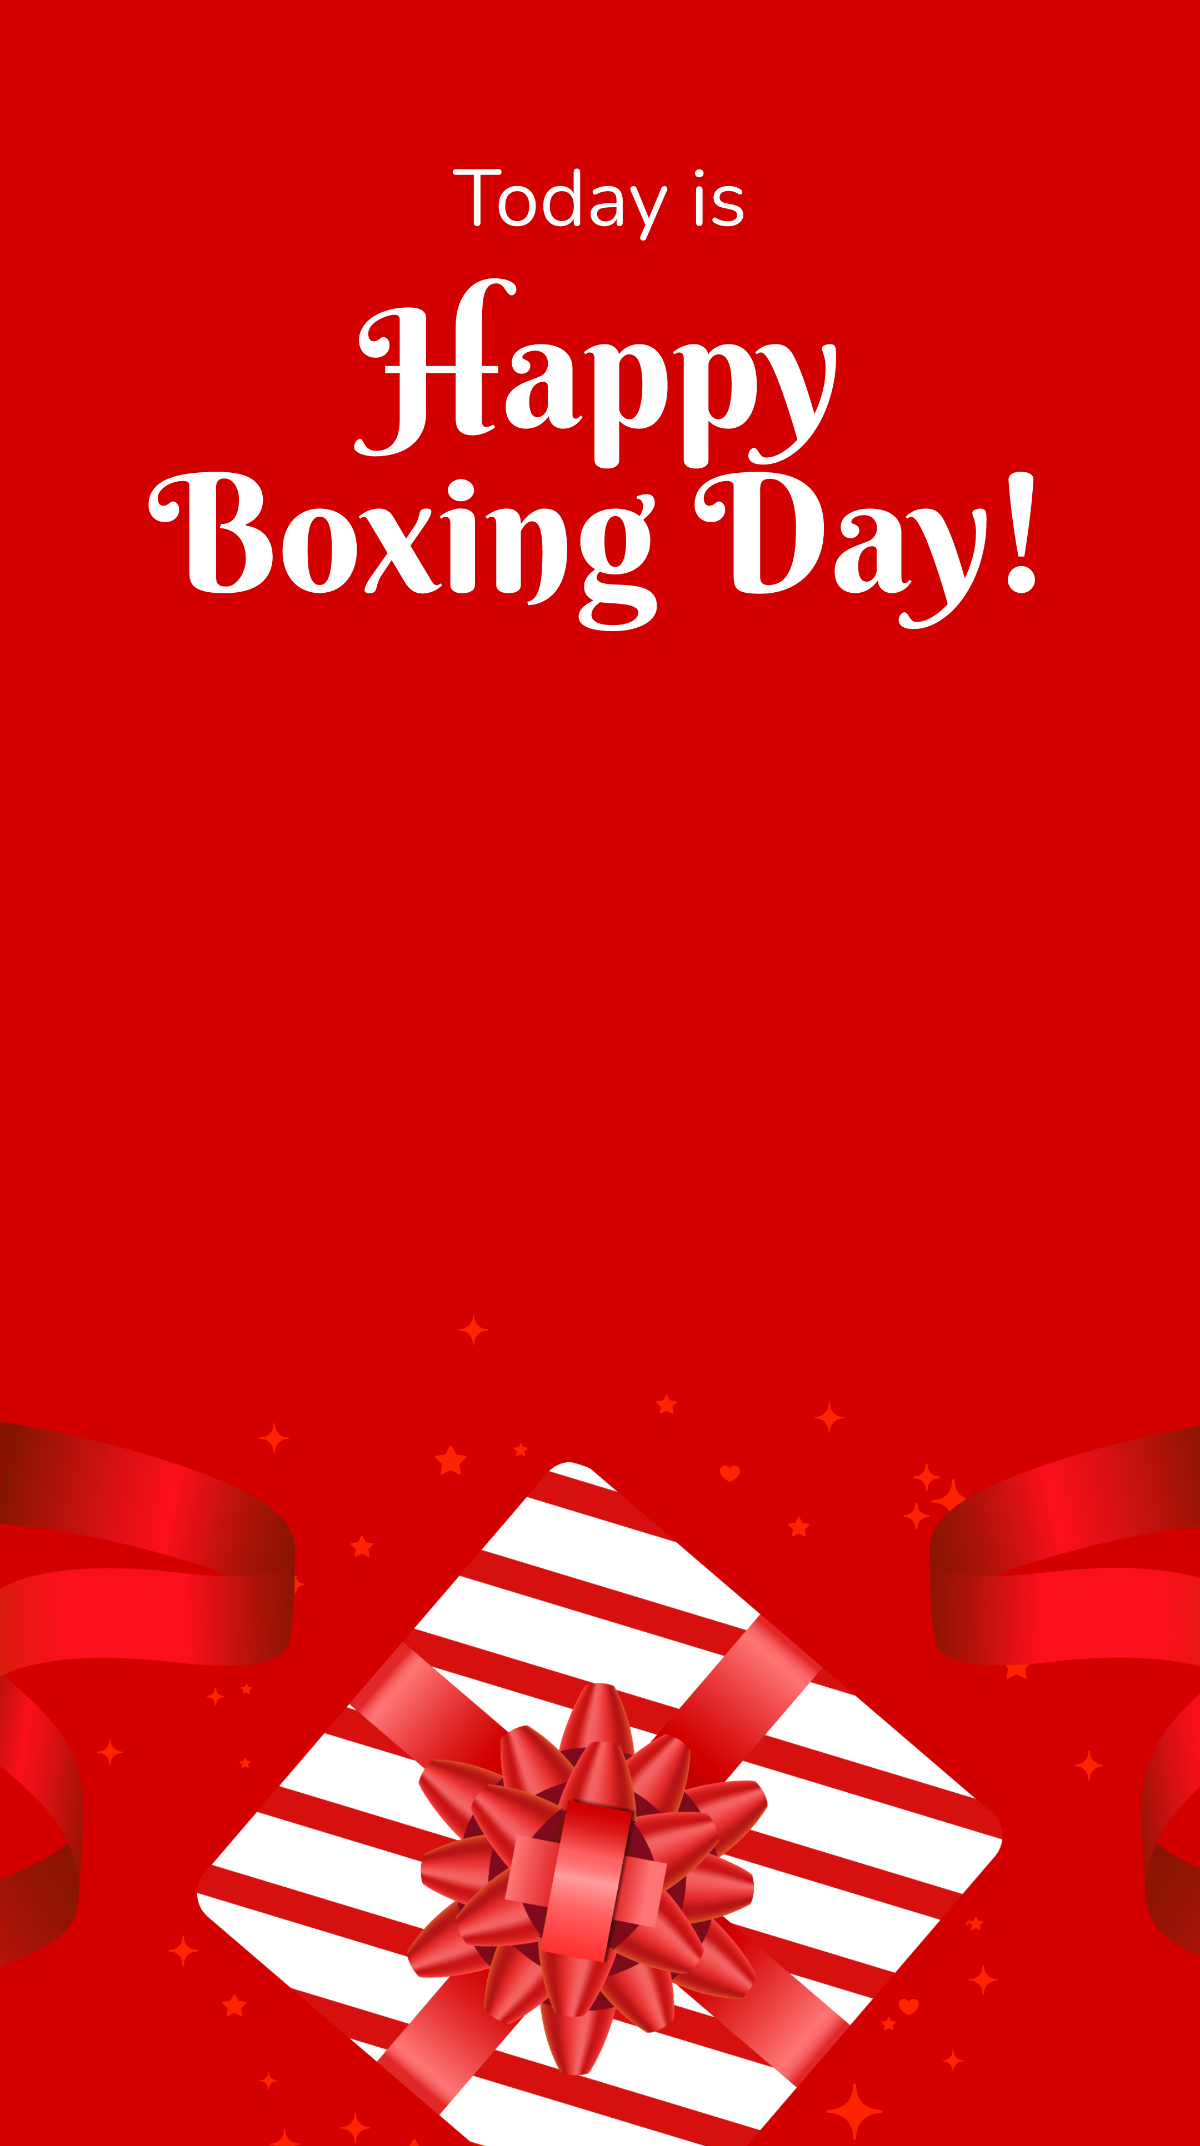 Happy Boxing Day Snapchat Geofilter